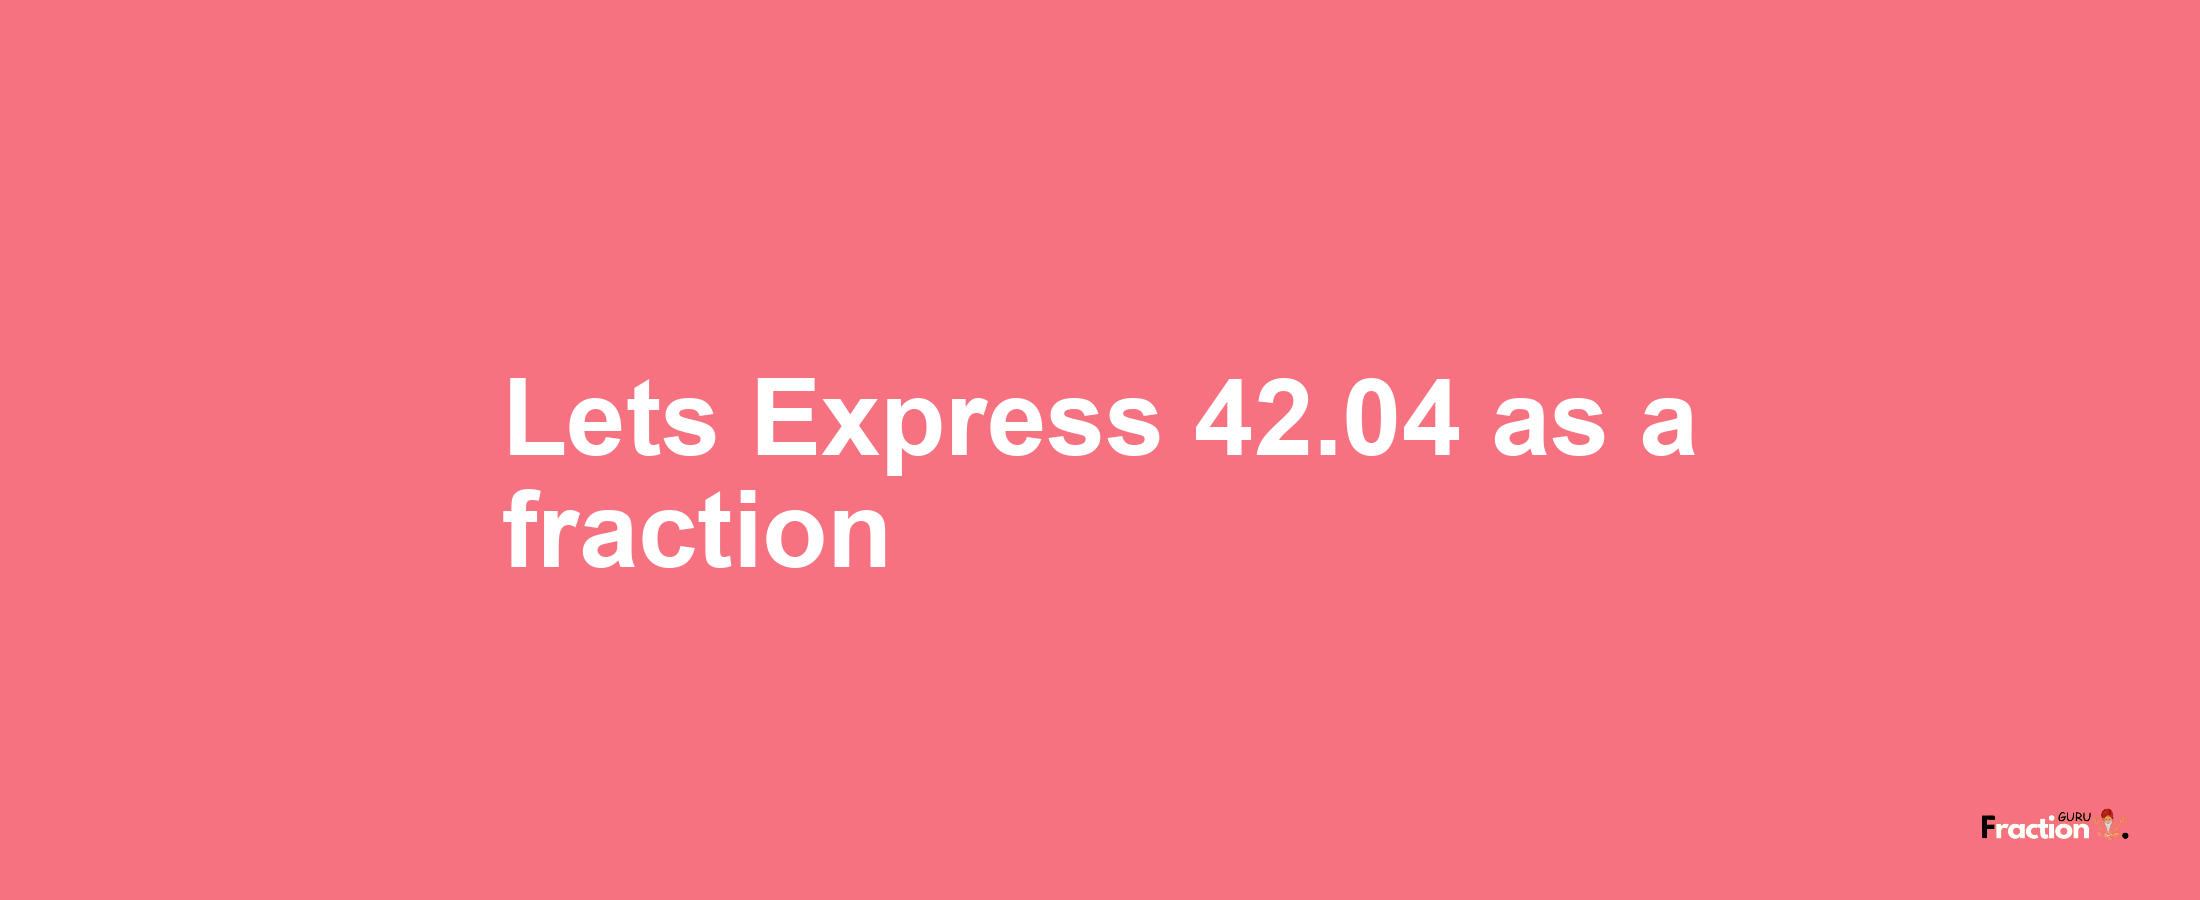 Lets Express 42.04 as afraction